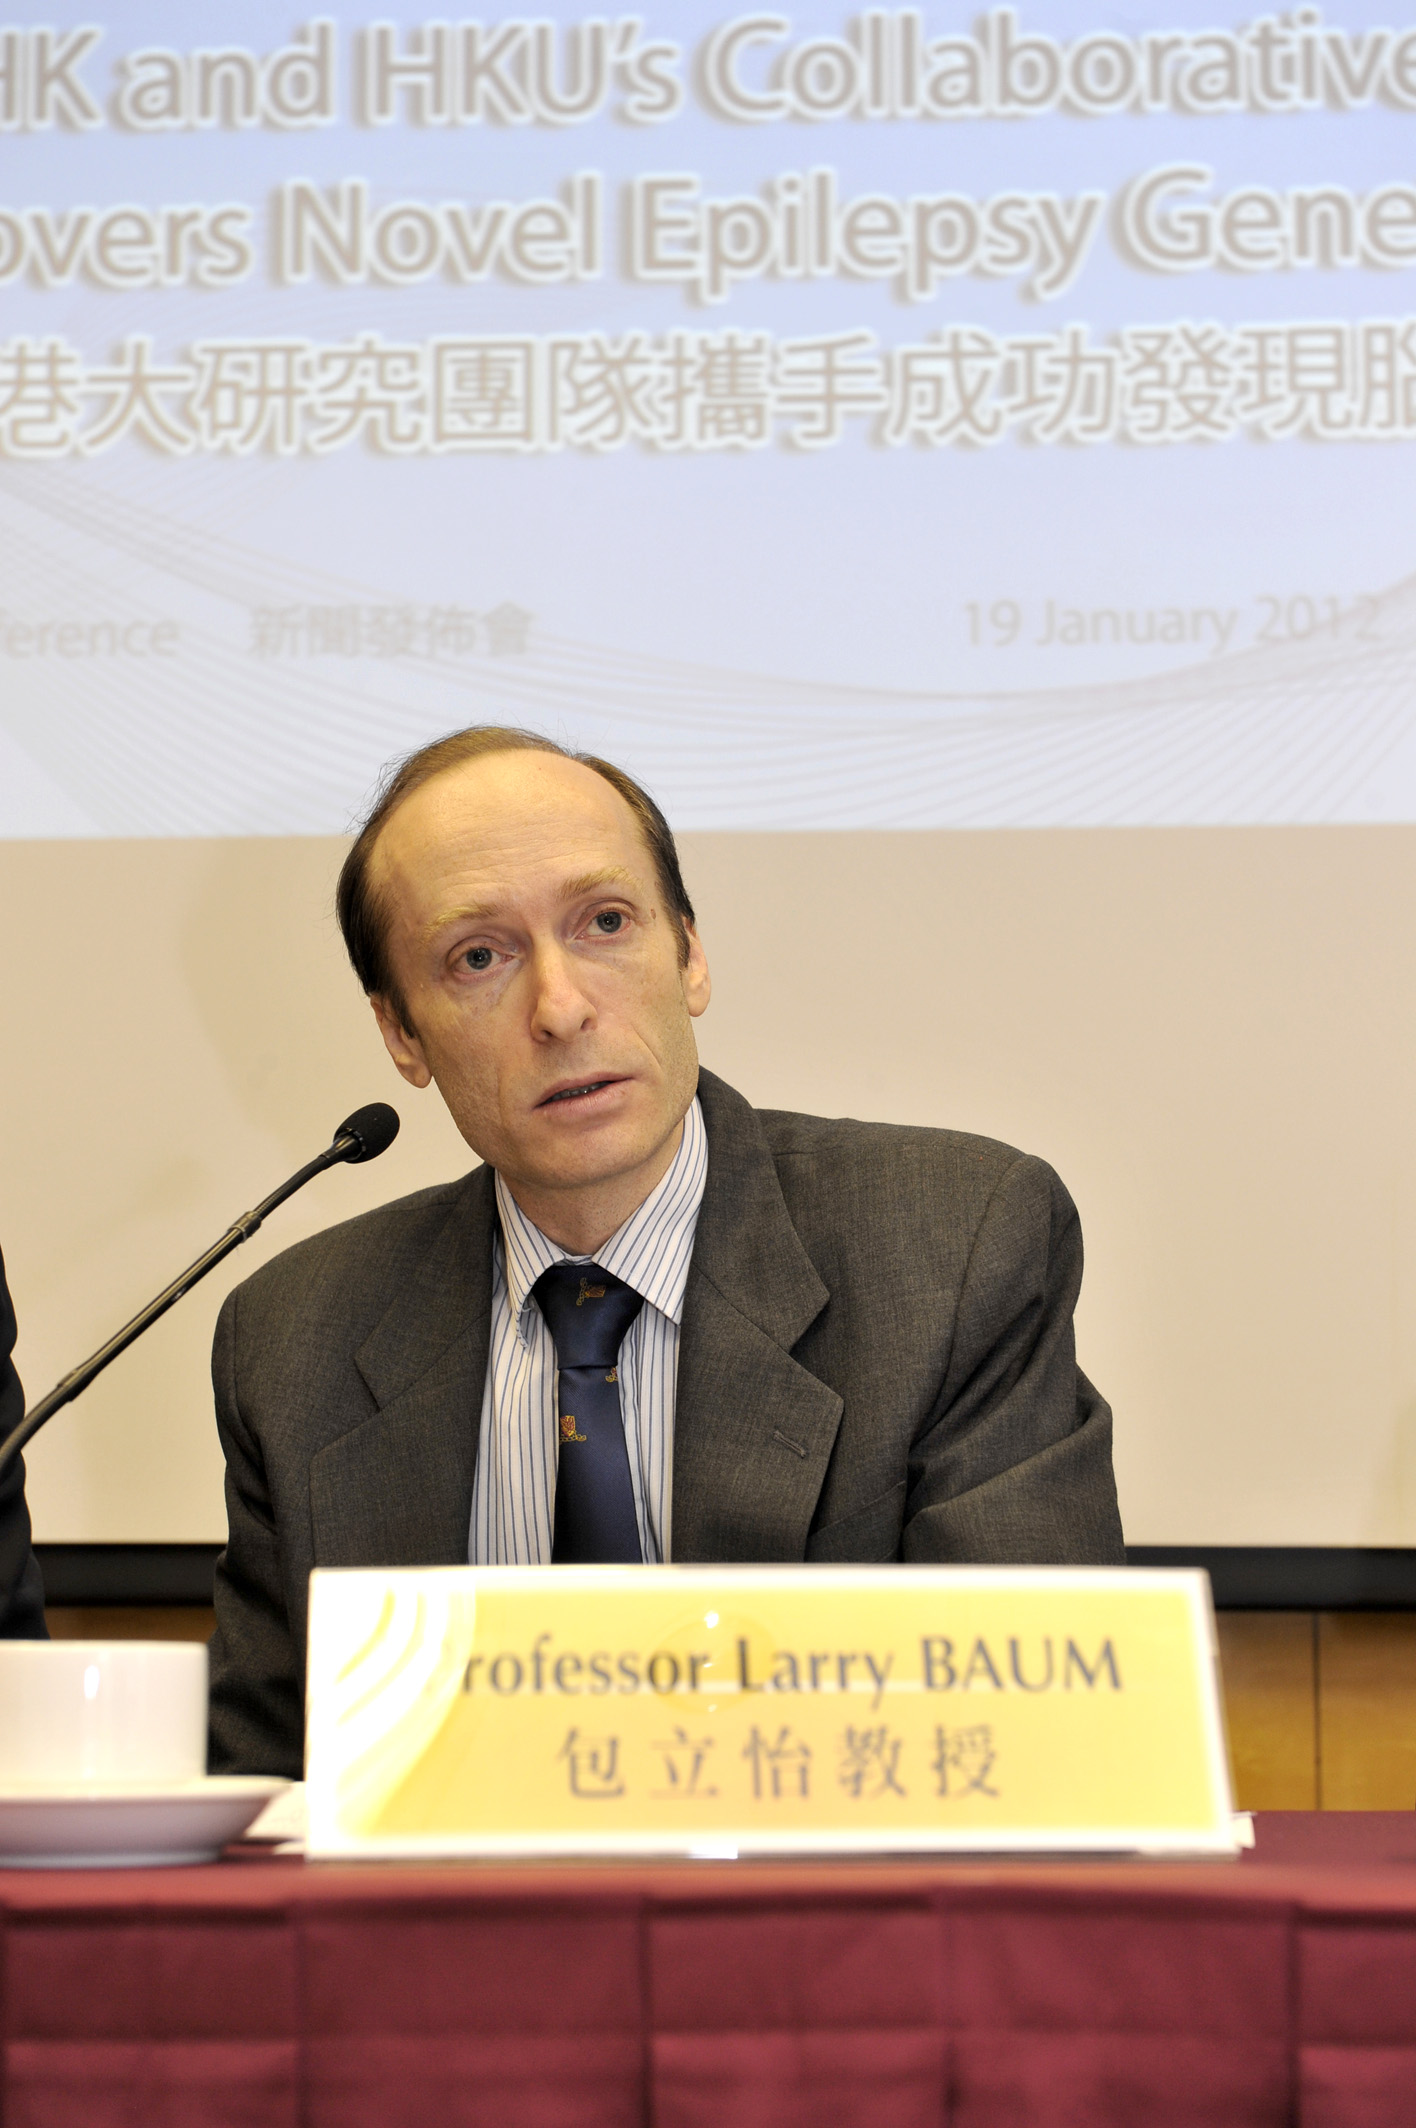 Prof. Larry BAUM added that prospective studies in regards to screening and treatment for people with this genetic marker susceptible to epilepsy will be fostered following this collaborative research study of two medical faculties at CUHK and HKU